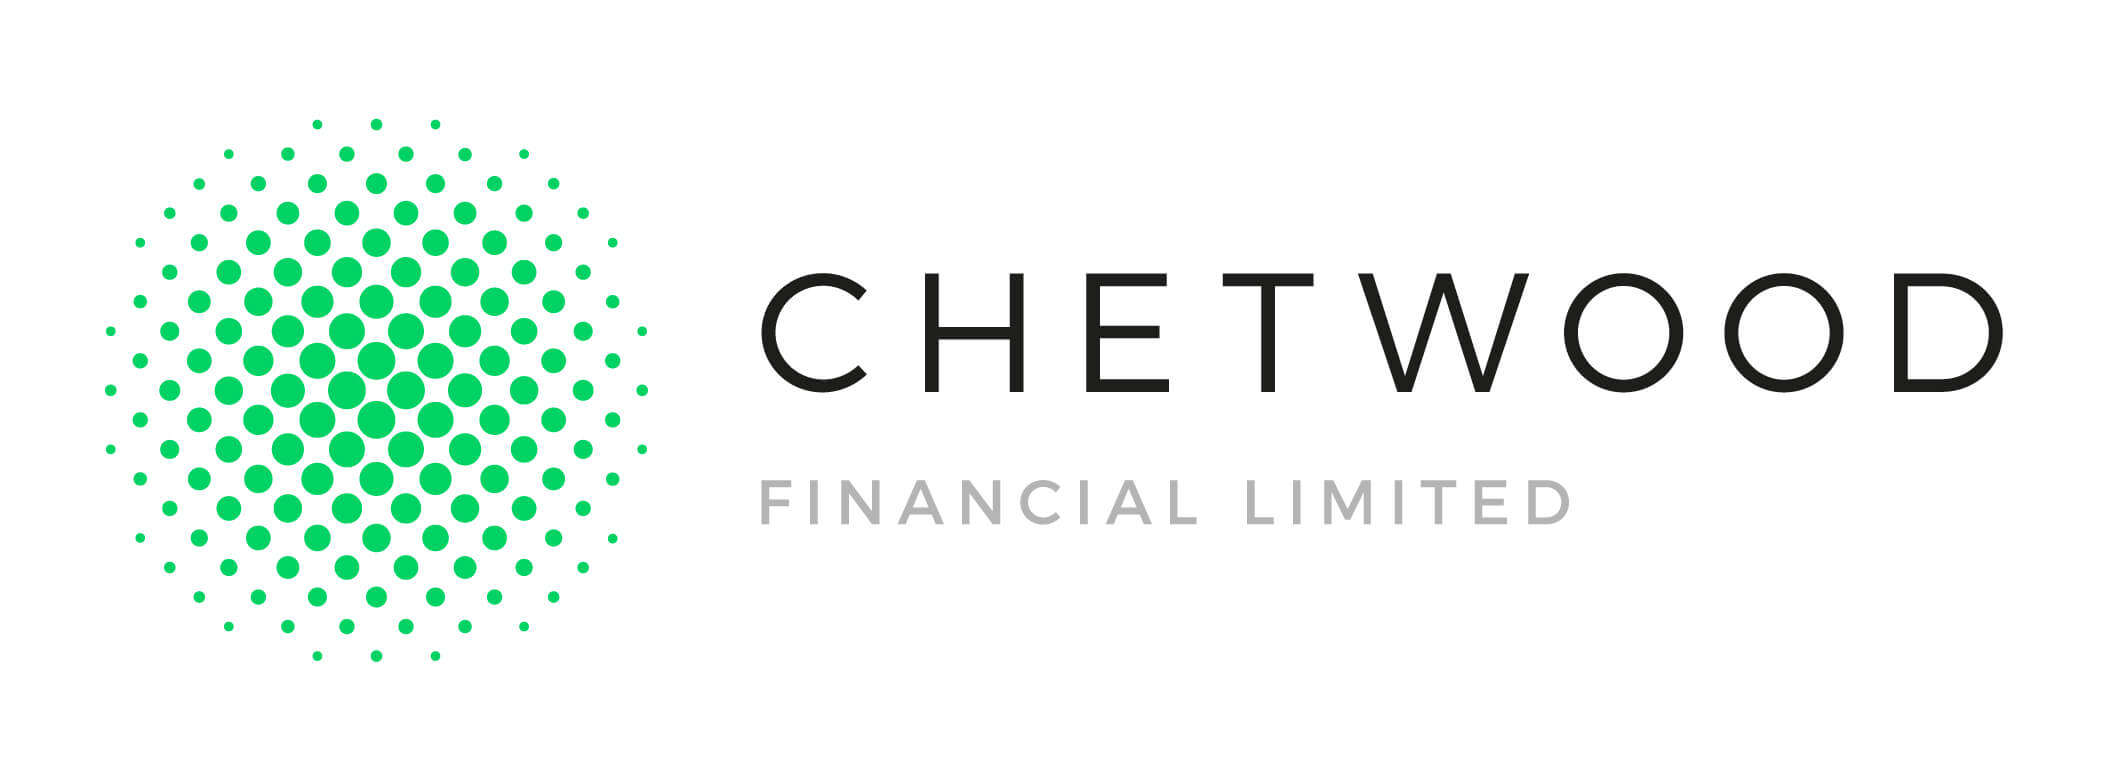 Chetwood Financial Launches First Credit Card, Wave, helping customers manage their finances over the long term